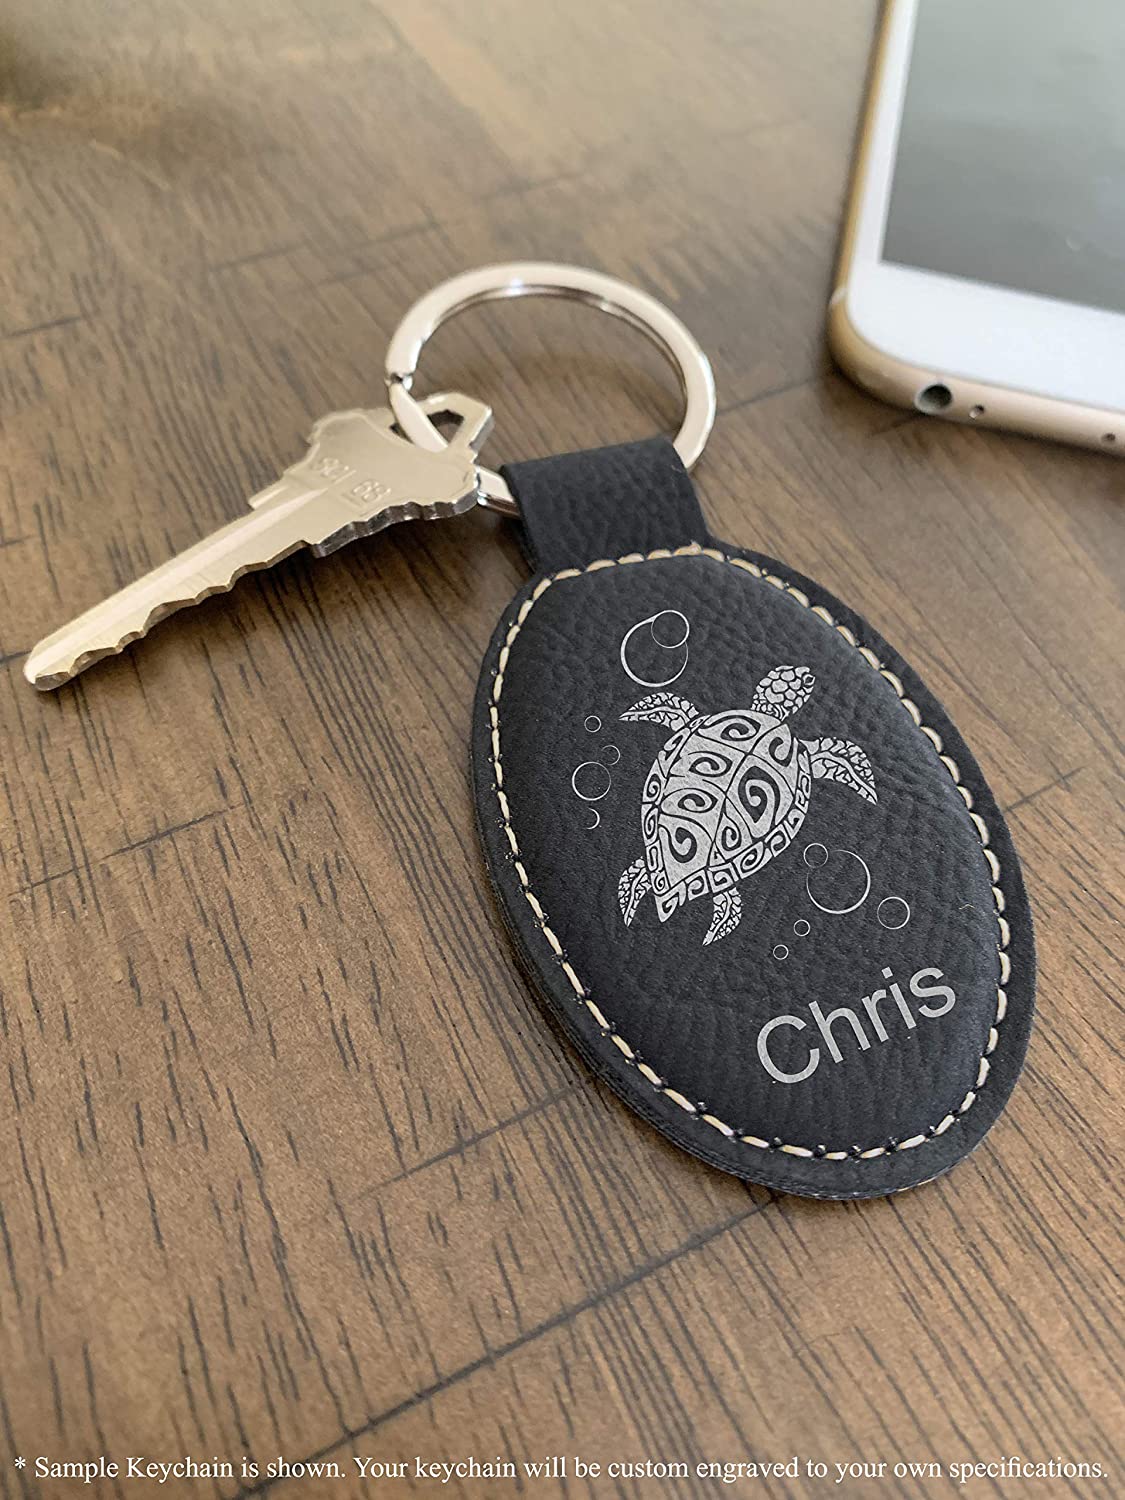 Faux Leather Oval Keychain, Diva, Personalized Engraving Included